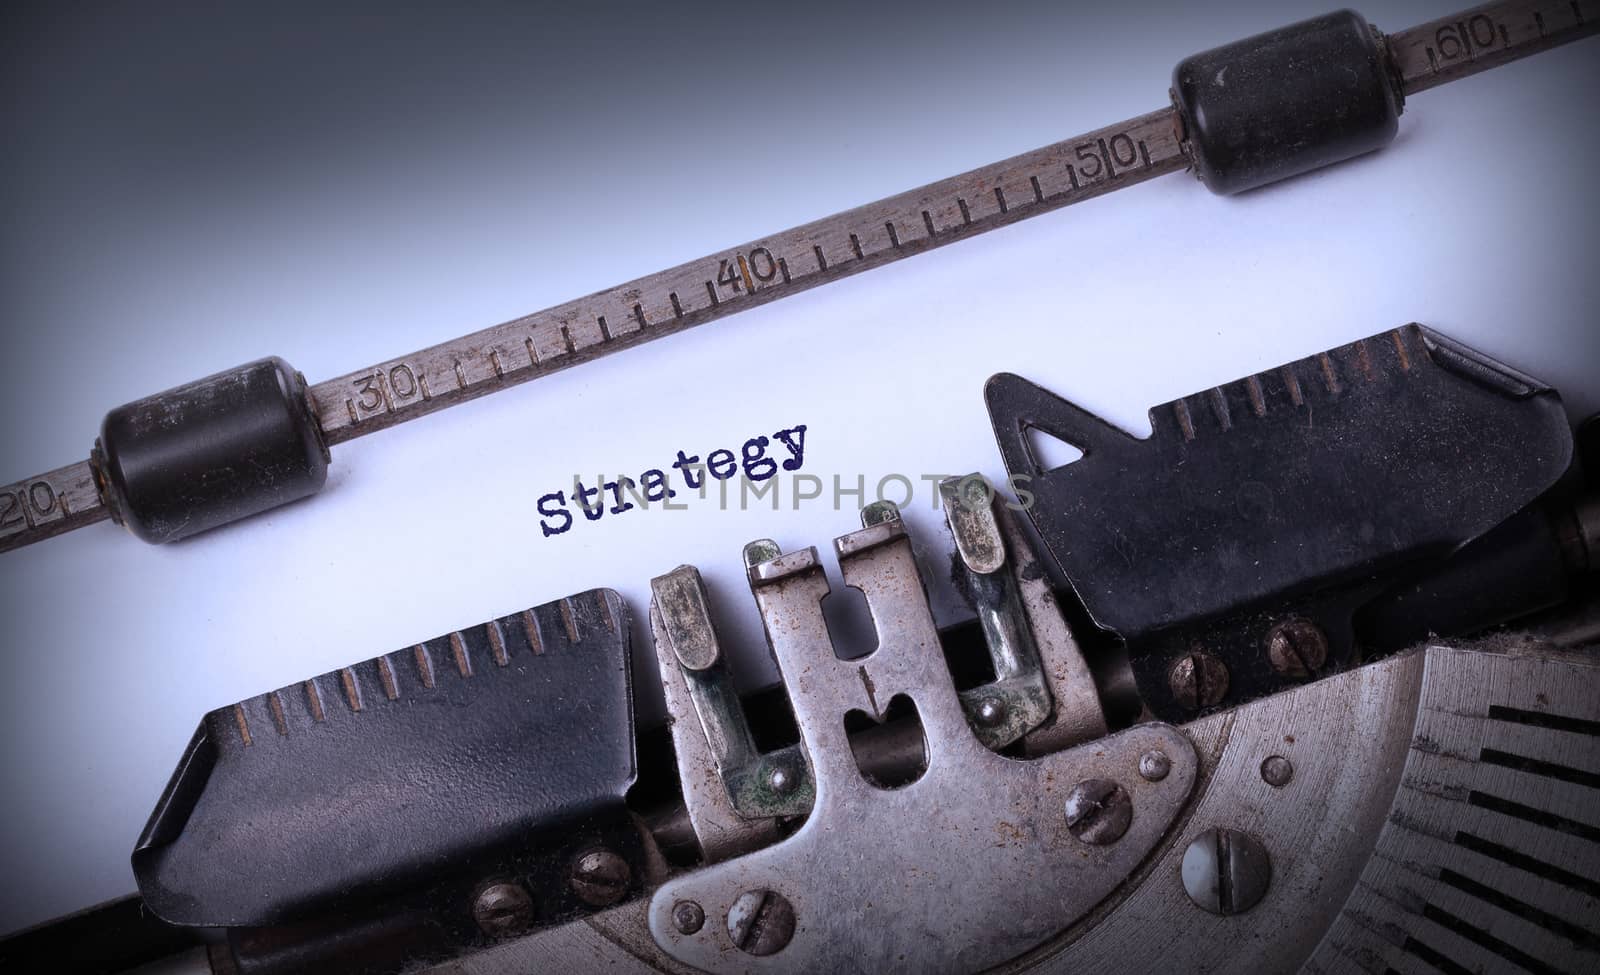 Vintage inscription made by old typewriter, Strategy